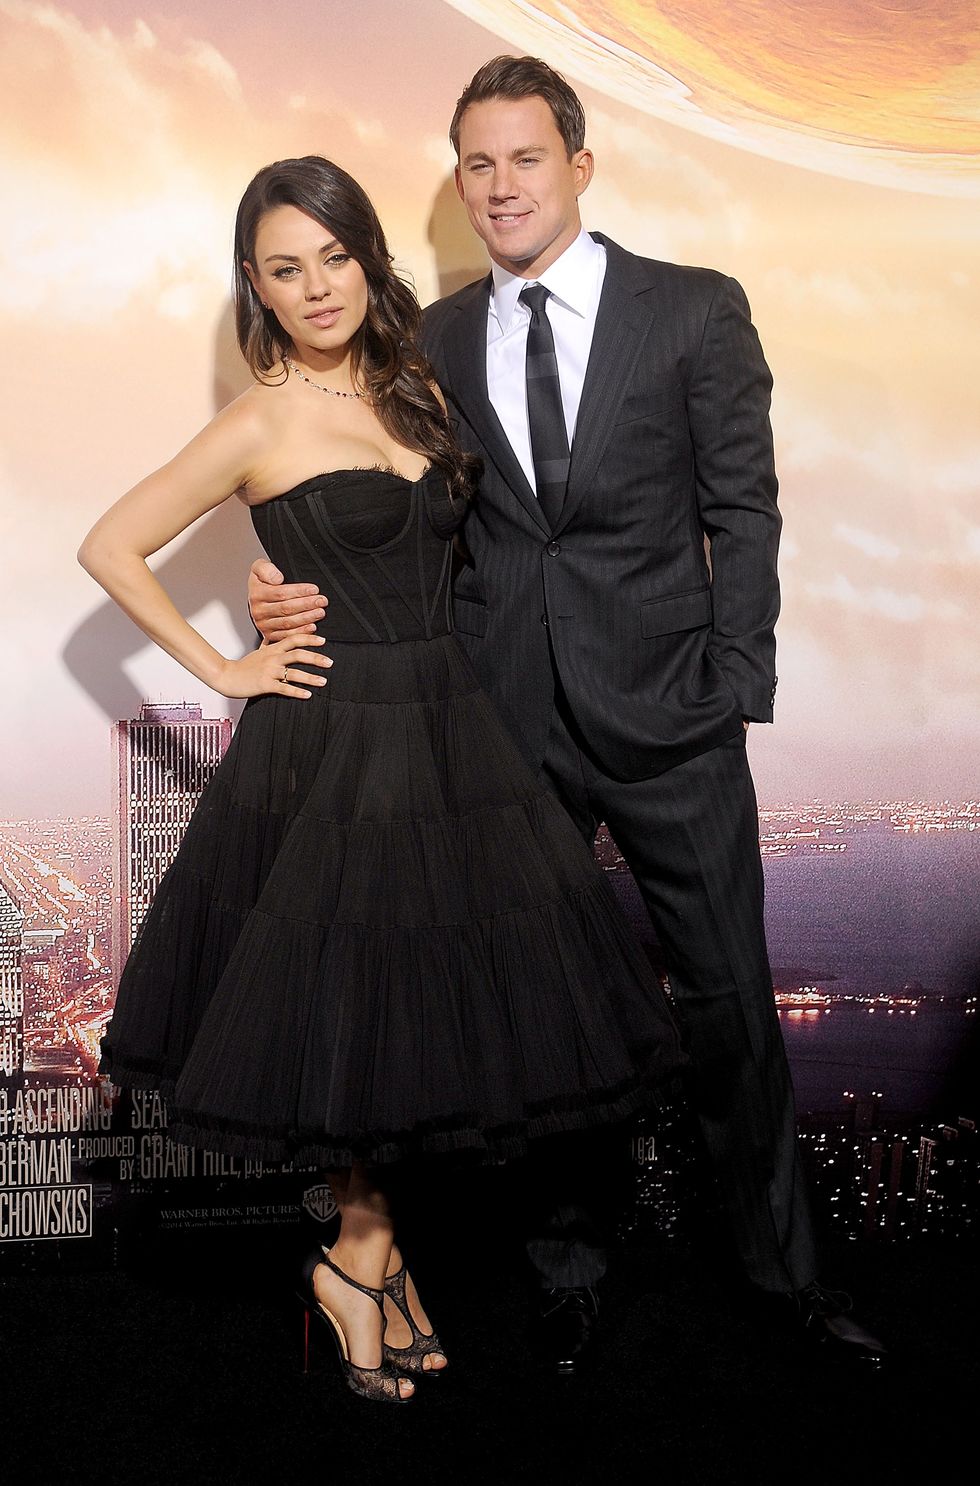 Mila Kunis and Chaning Tatum at the Jupiter Ascending premiere